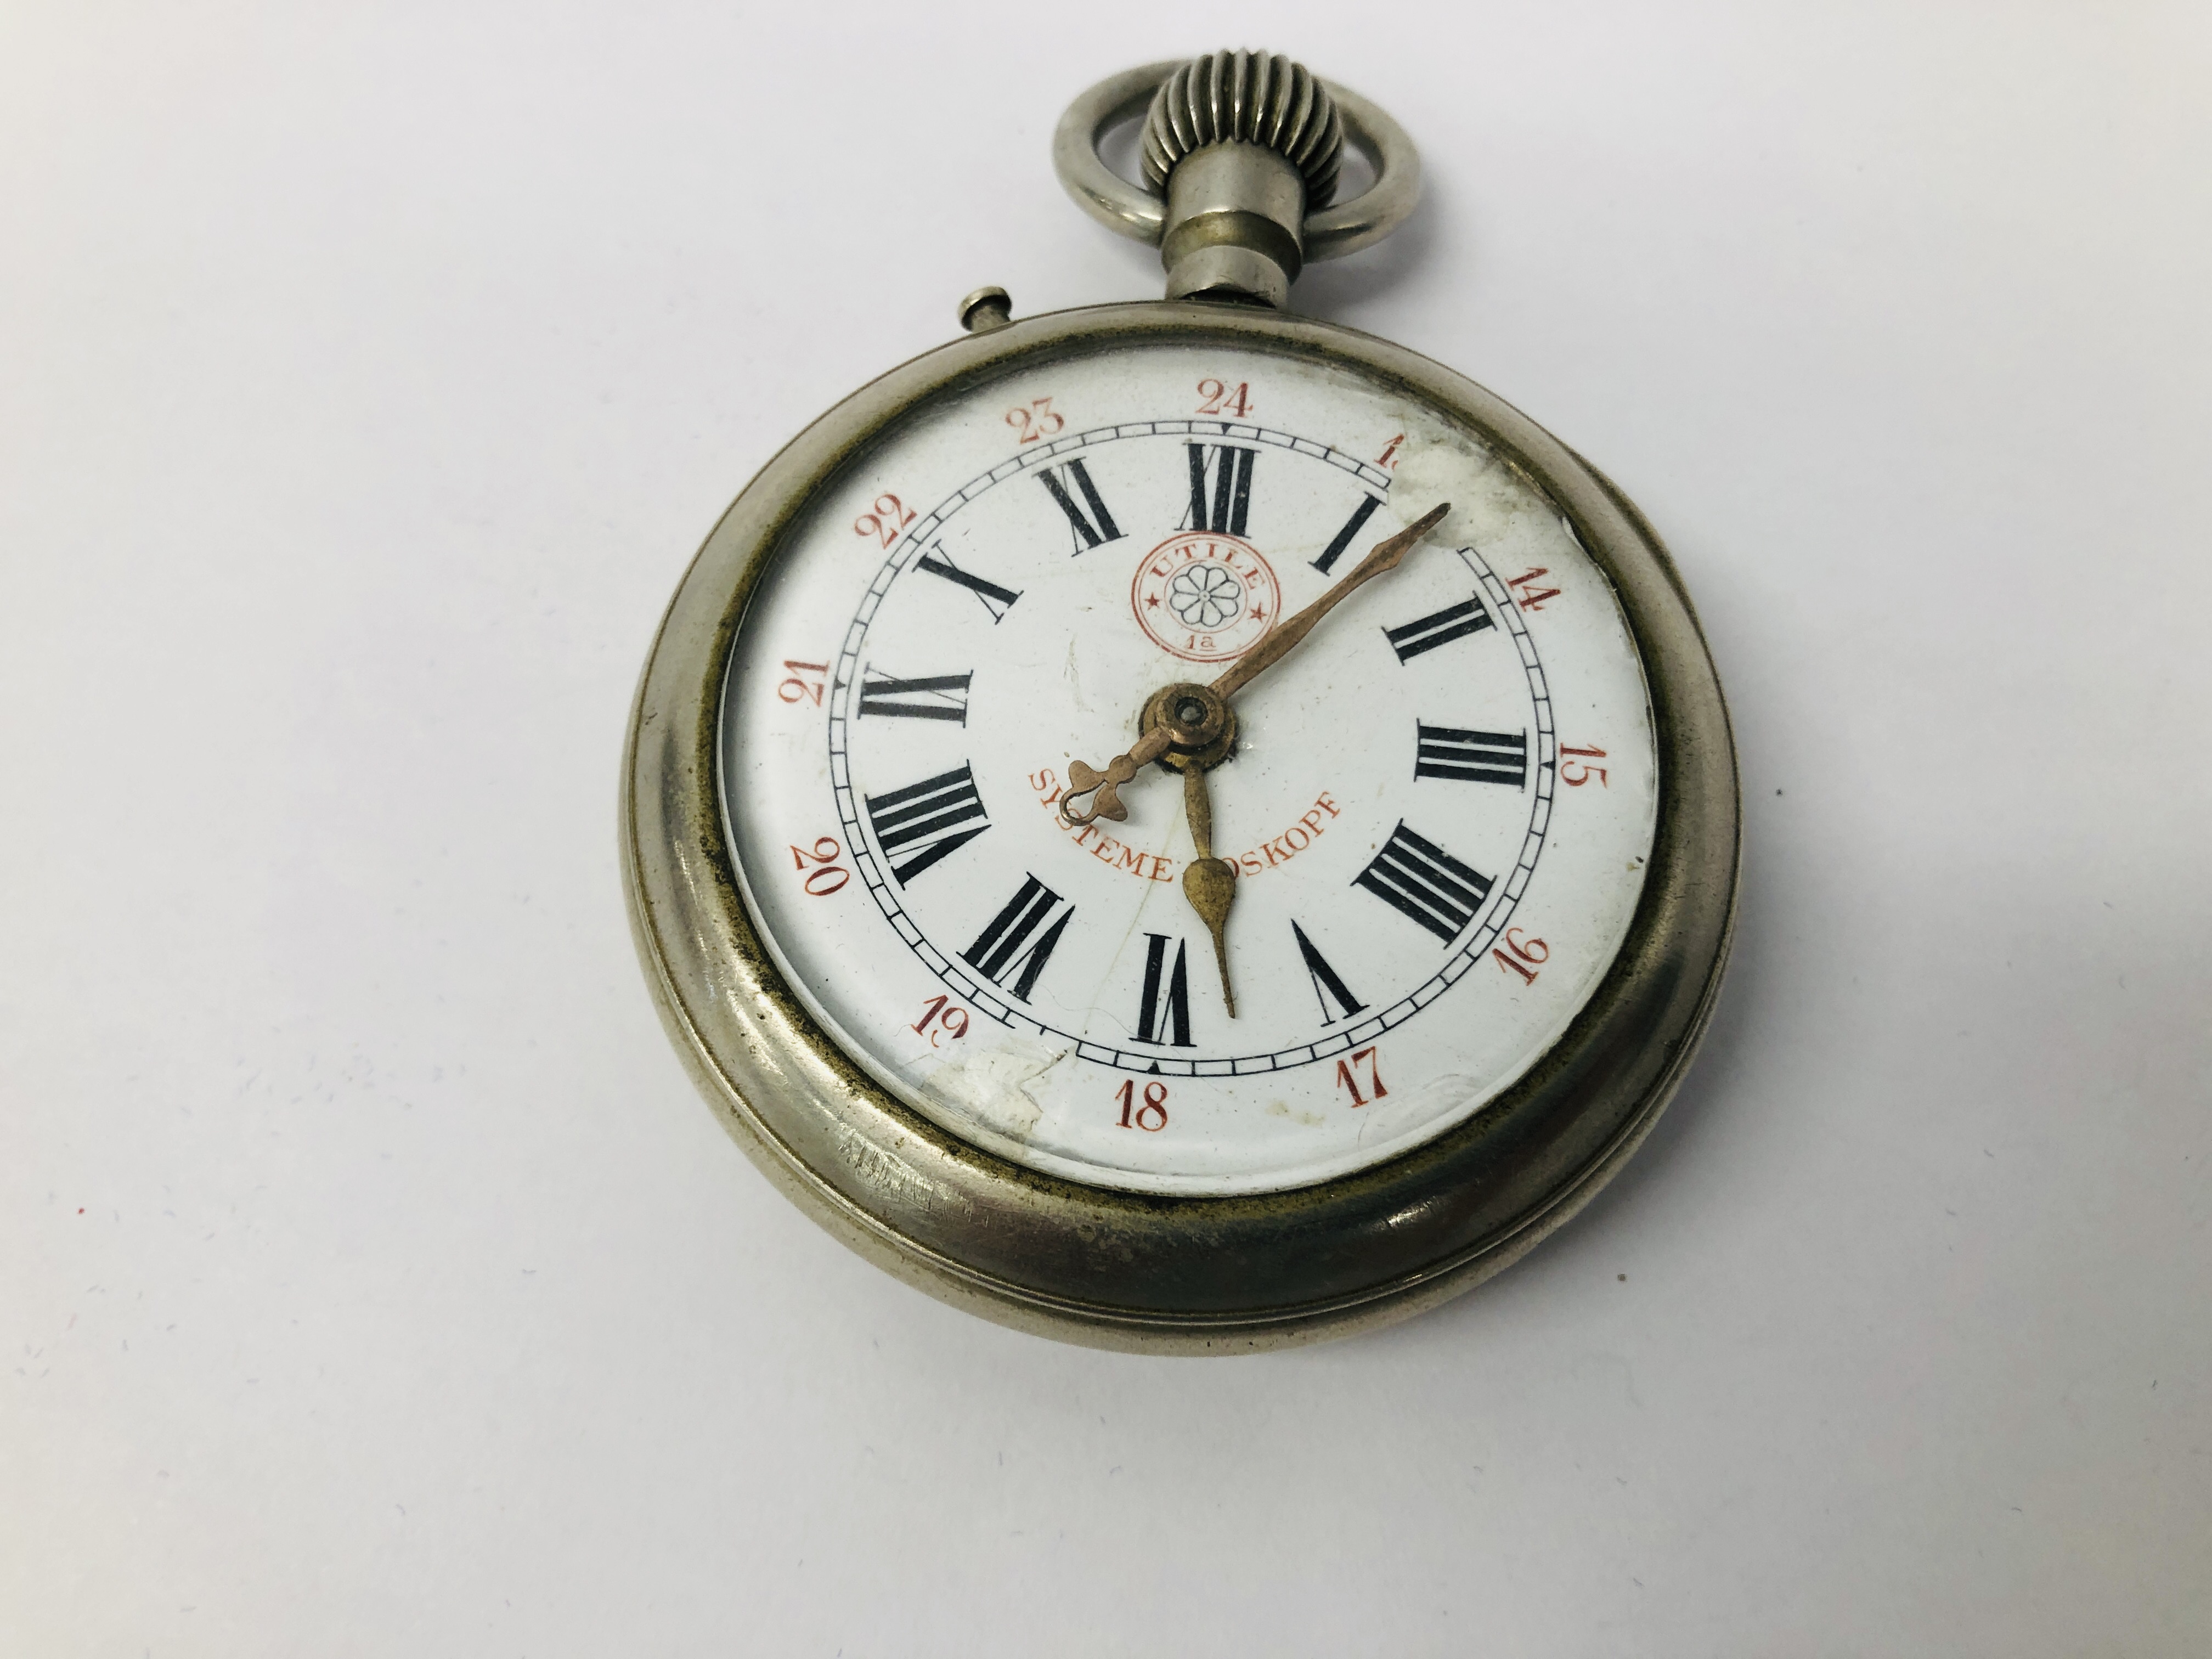 "ROSSKOPF" SYSTEME SWISS MADE POCKET WATCH, ENAMELLED DIAL A/F D 6CM. - Image 2 of 7